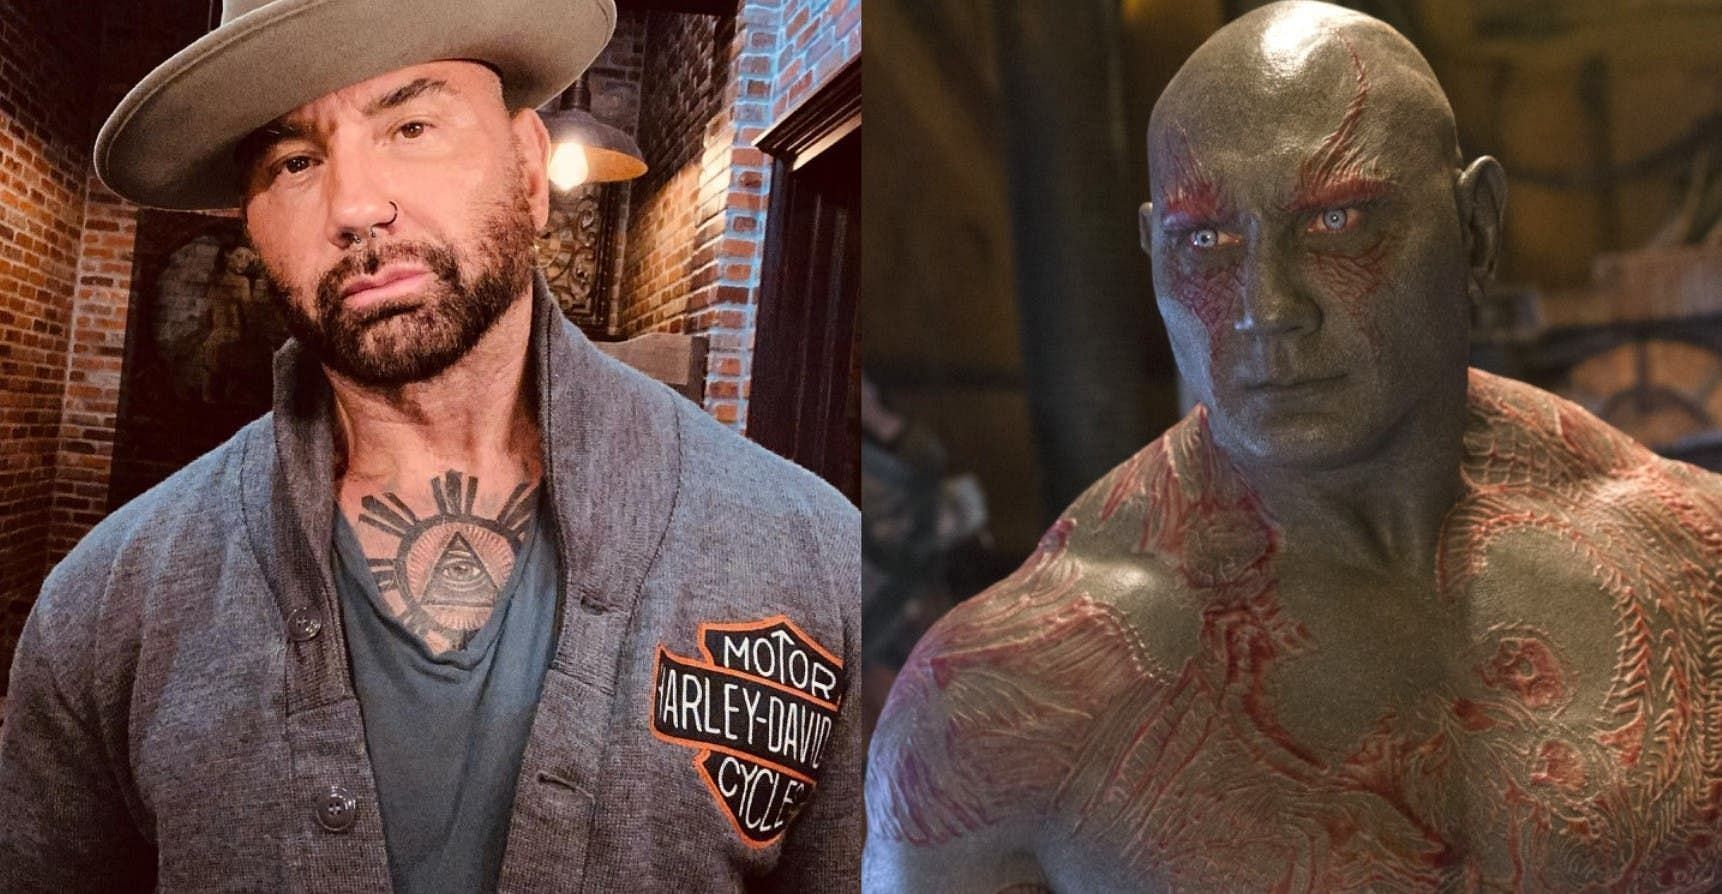 Dave Bautista won't star as Drax the Destroyer character after 'Guardians  of the Galaxy Vol. 3